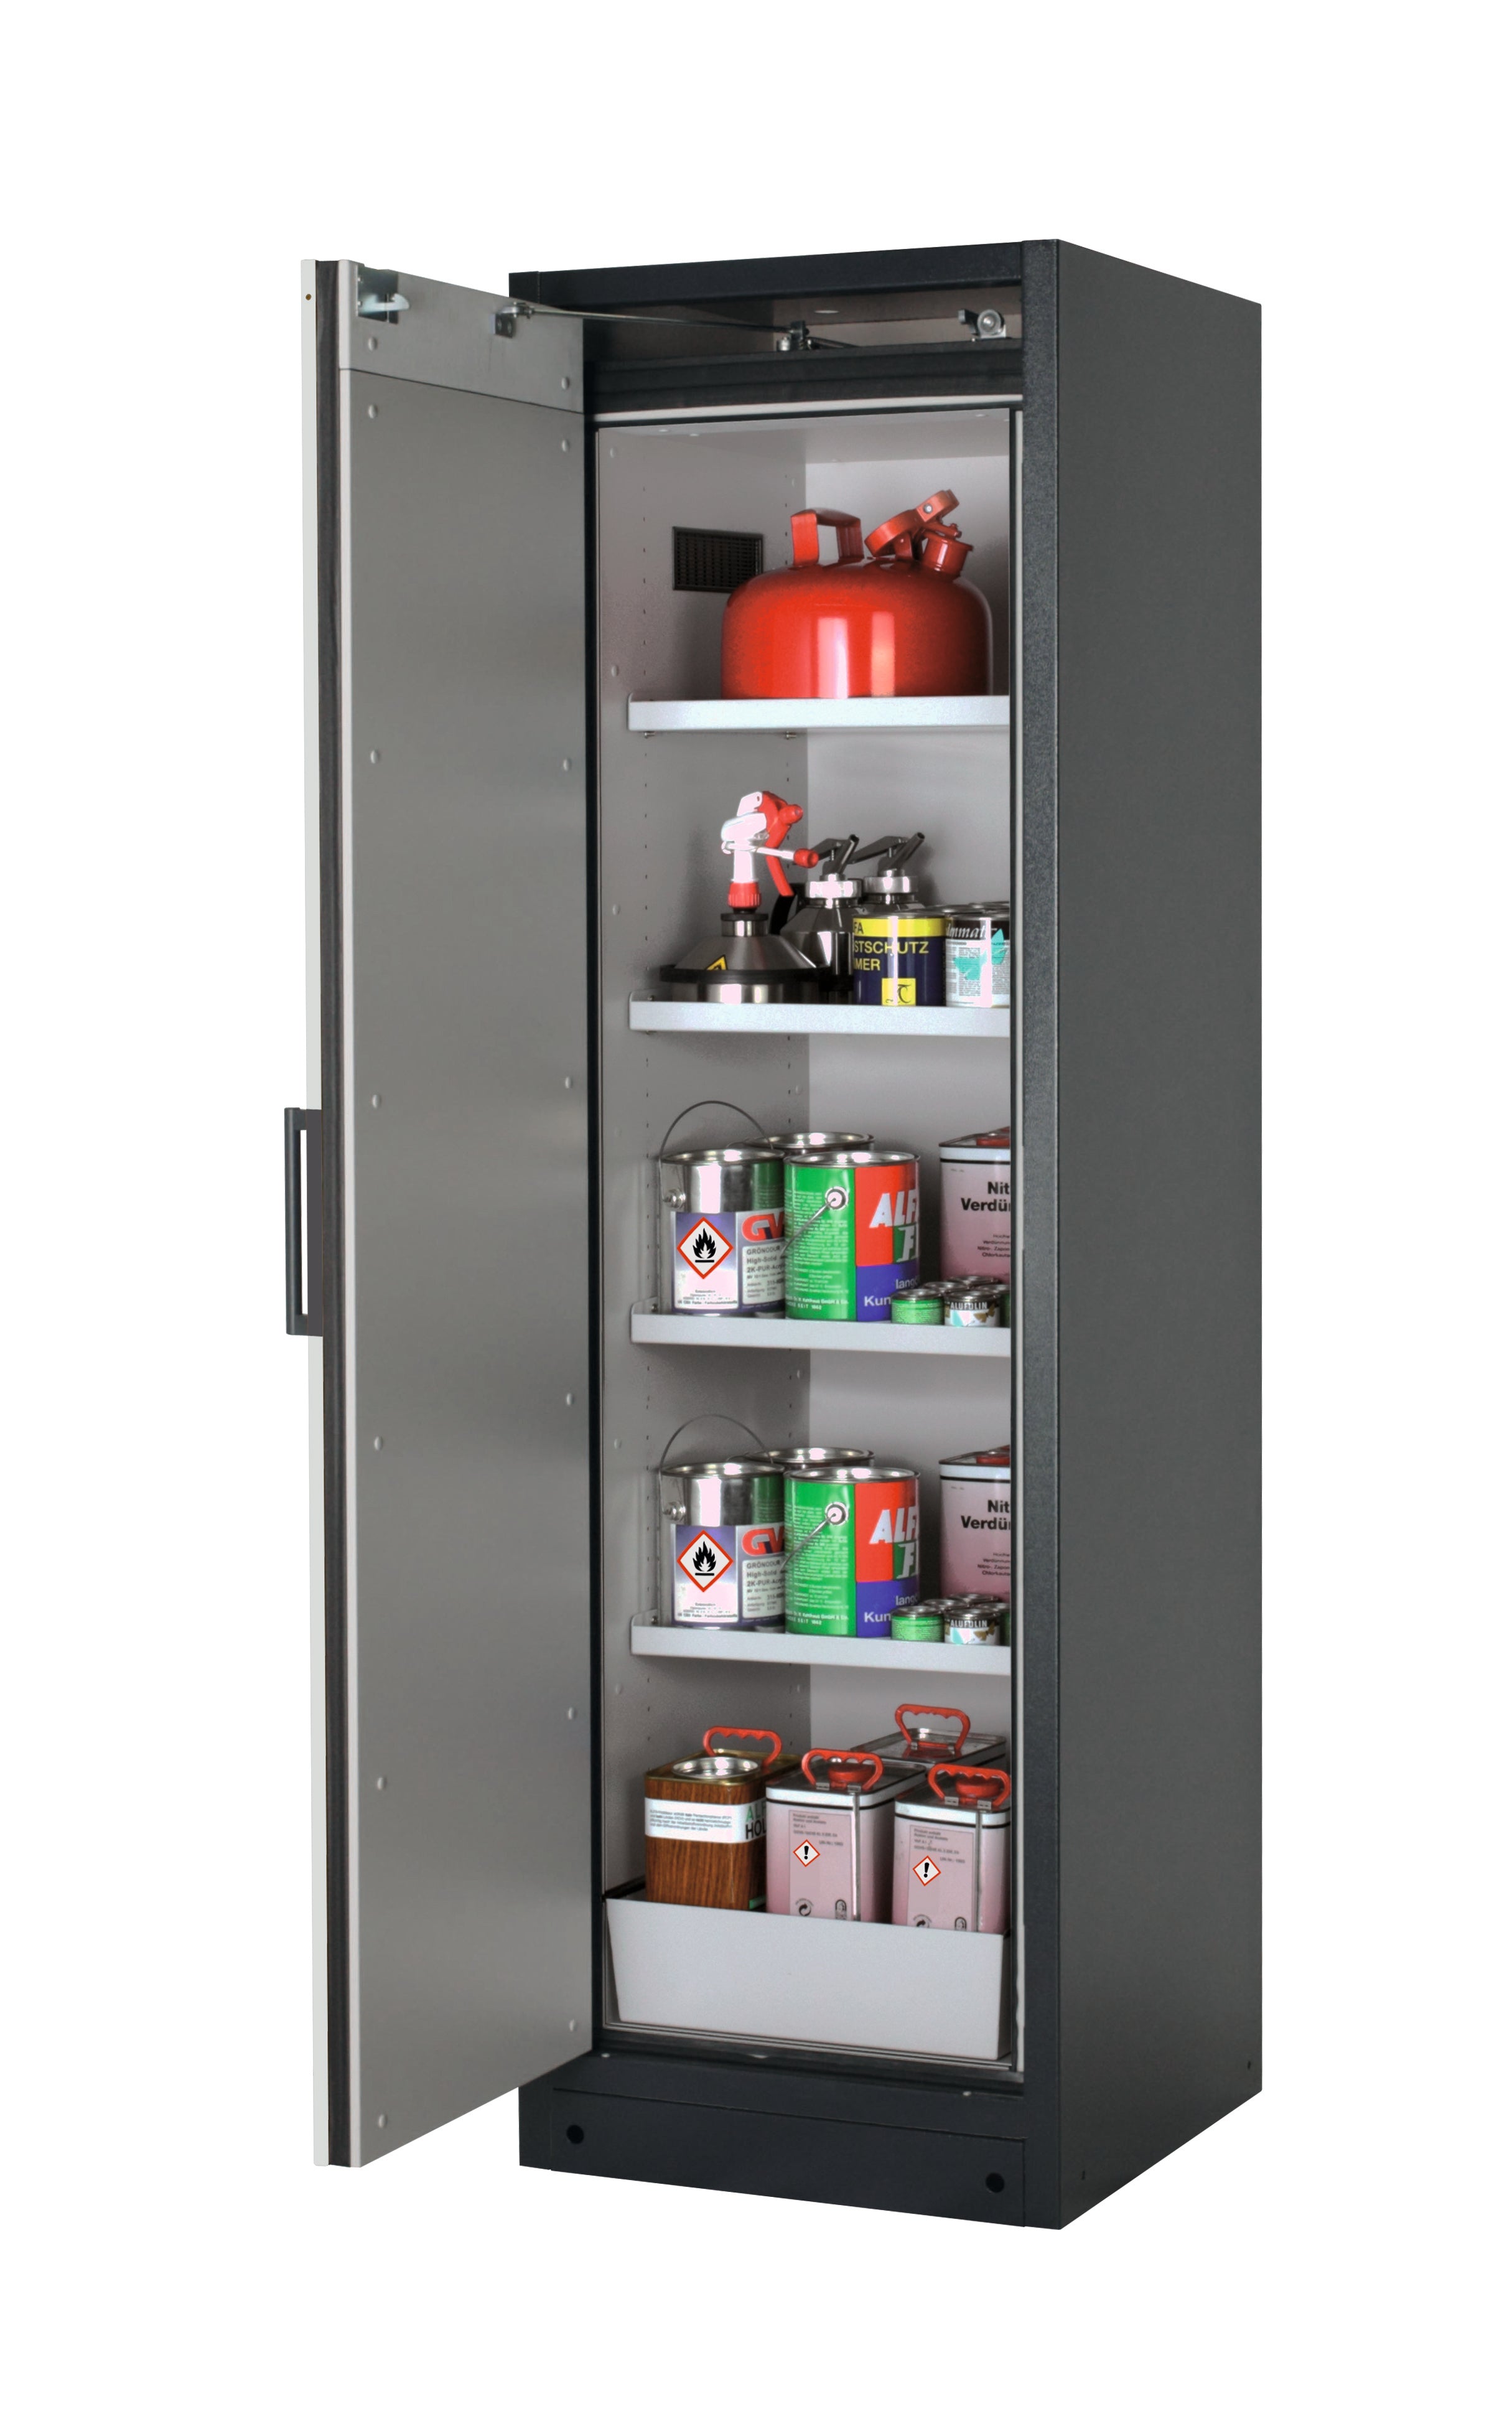 Type 90 safety storage cabinet Q-CLASSIC-90 model Q90.195.060 in light grey RAL 7035 with 4x shelf standard (sheet steel),